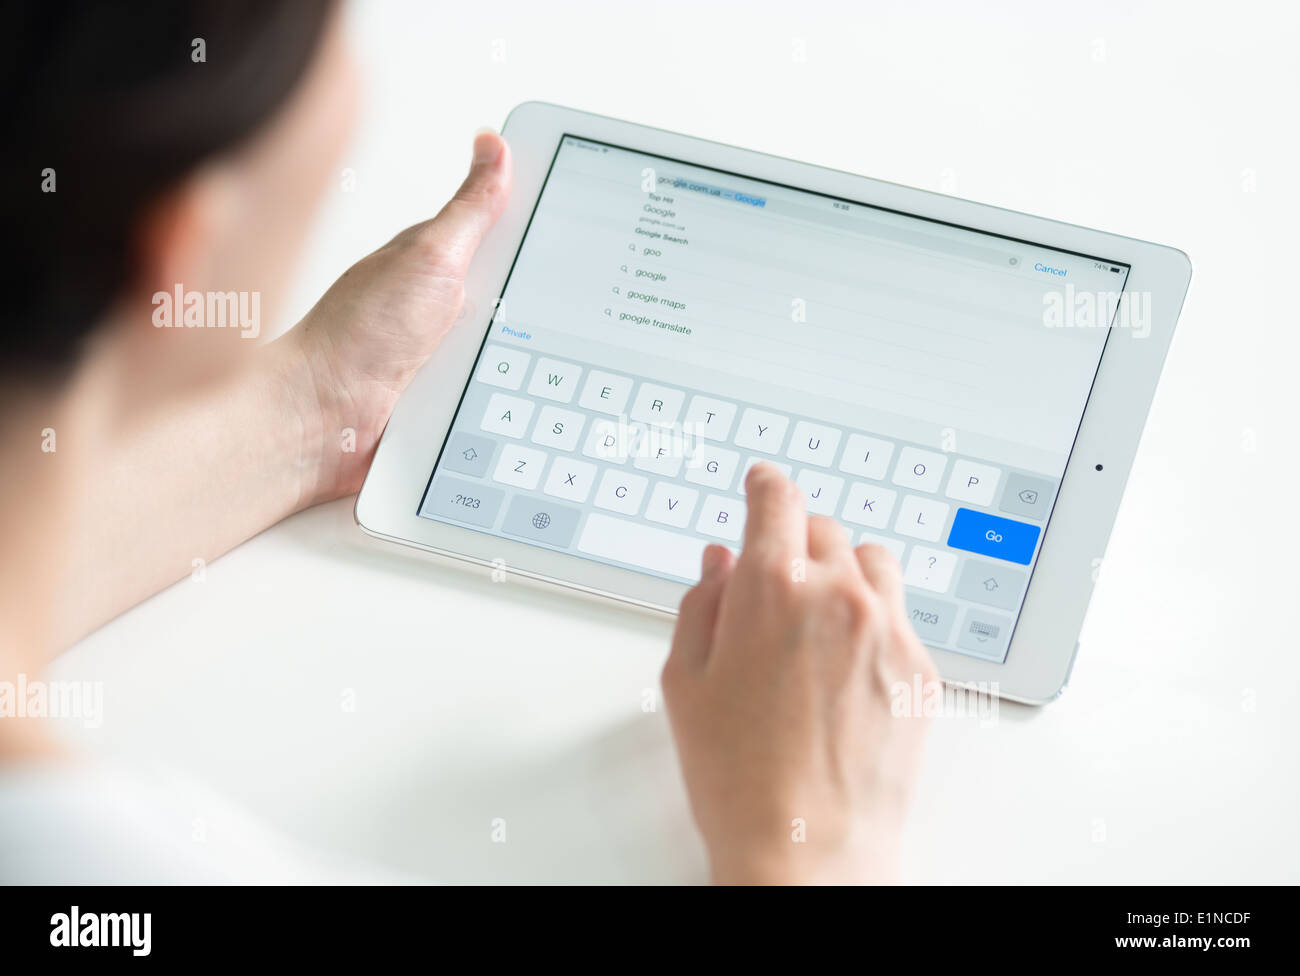 Woman holding a white Apple iPad Air and typing for search Google web page in Safari browser Stock Photo